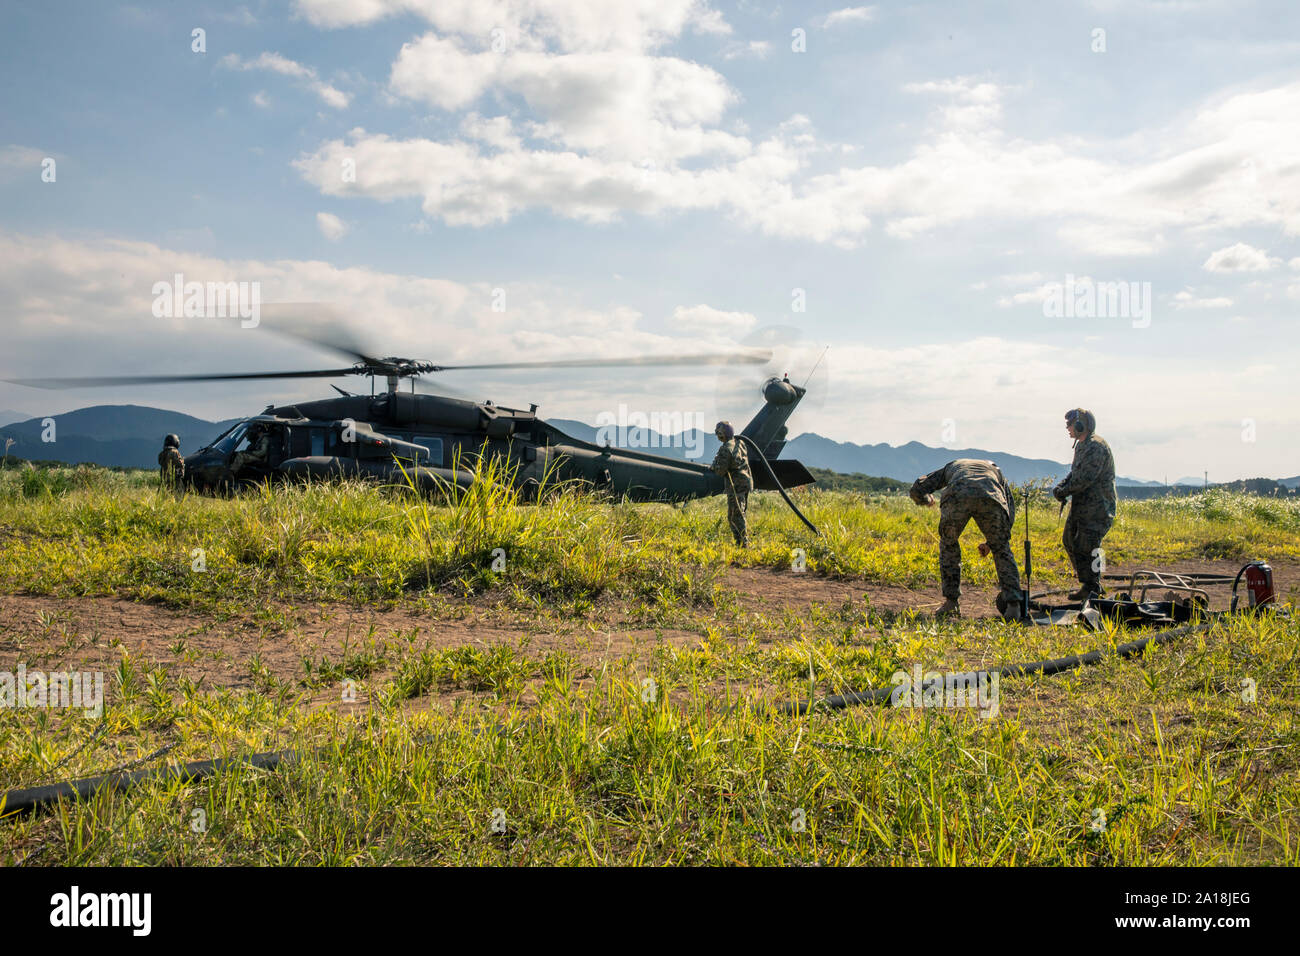 U.S. Marines with Marine Wing Support Squadron (MWSS) 171 establish a forward arming and refueling point in support of U.S. Army pilots-in-training during exercise Orient Shield in Kumomoto, Japan, Sep. 16, 2019.  Orient Shield is an annual joint force training exercise involving the U.S. Army and MWSS 171 where they perform landing and refueling training. (U.S. Marine Corps photo by Lance Cpl. Triton Lai) Stock Photo